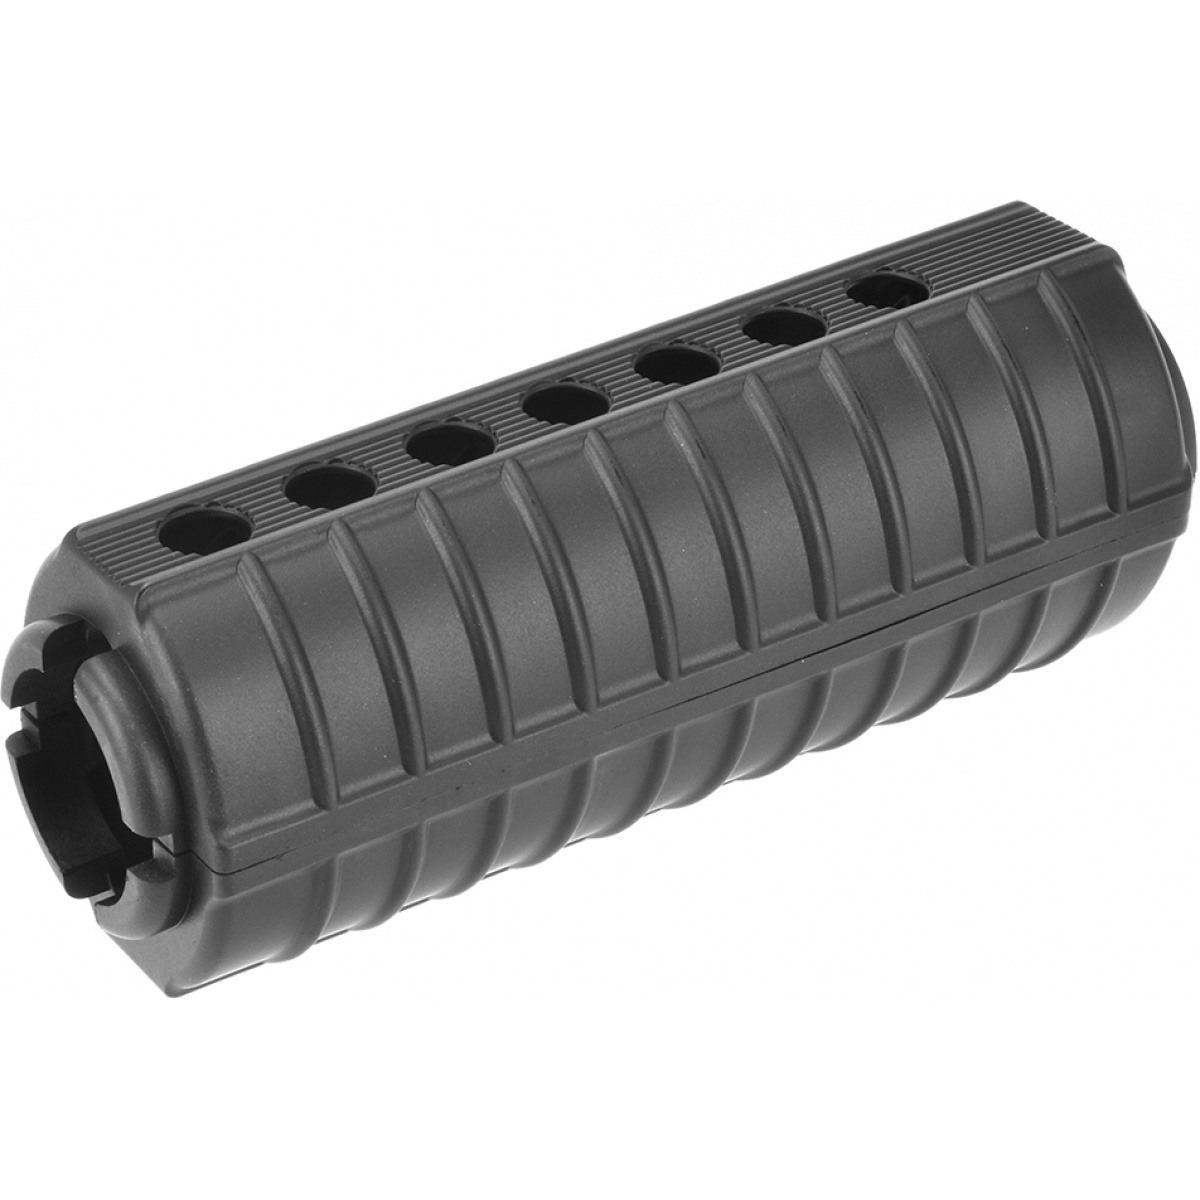 Golden Eagle M4A1 Airsoft Drop-In Handguard for M4 AEGs - BLACK ...